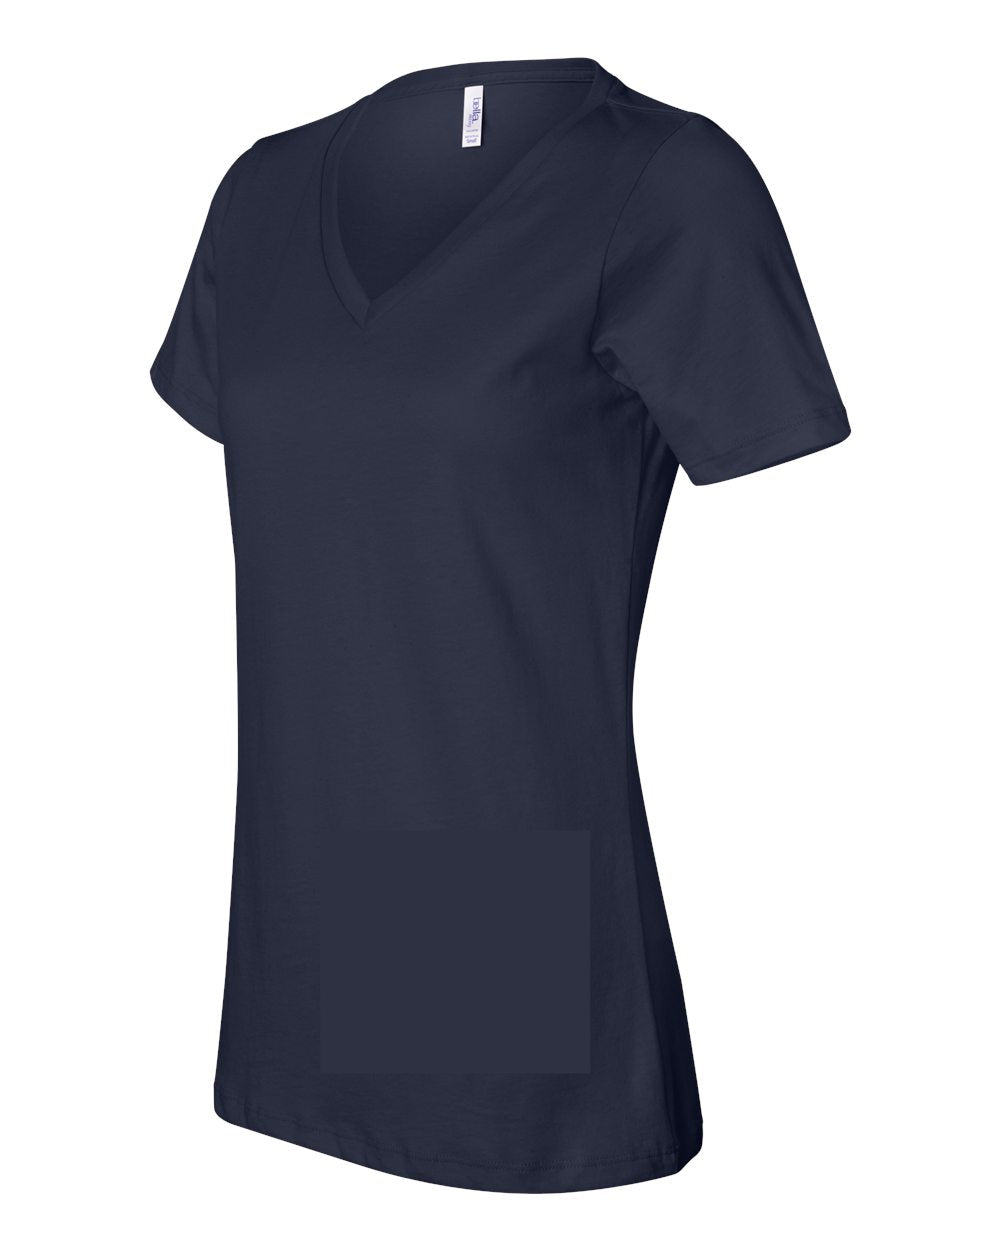 BELLA + CANVAS Women’s Relaxed Jersey V-Neck Tee 6405 #color_Navy